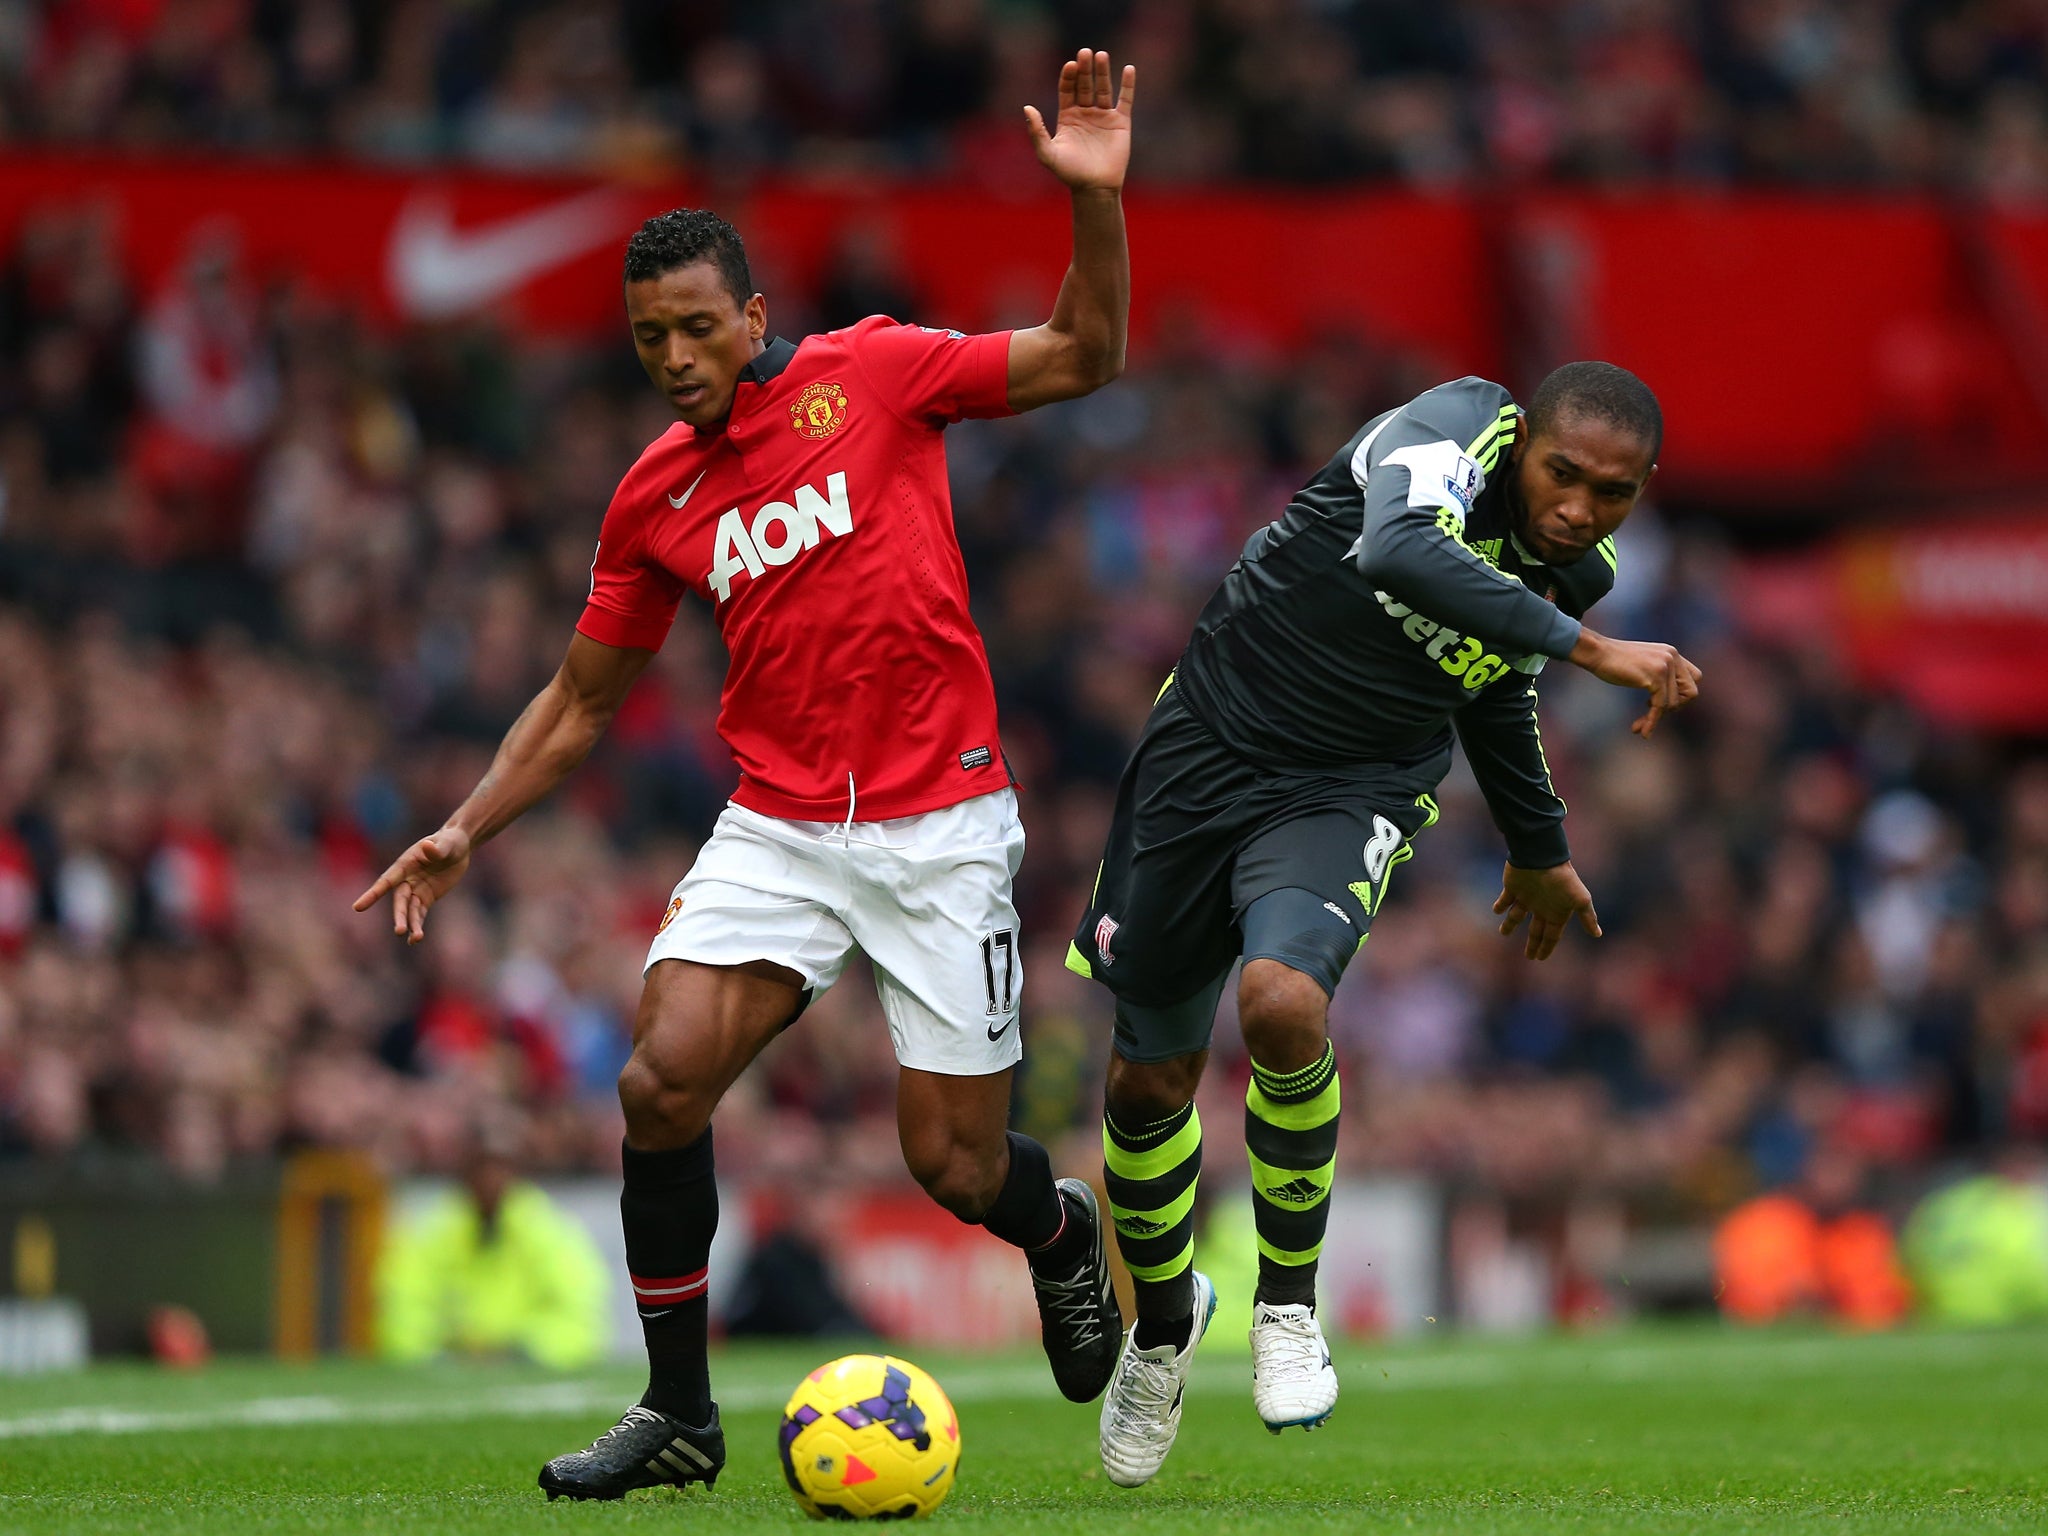 Manchester United manager David Moyes has given his support to the under-fire Nani